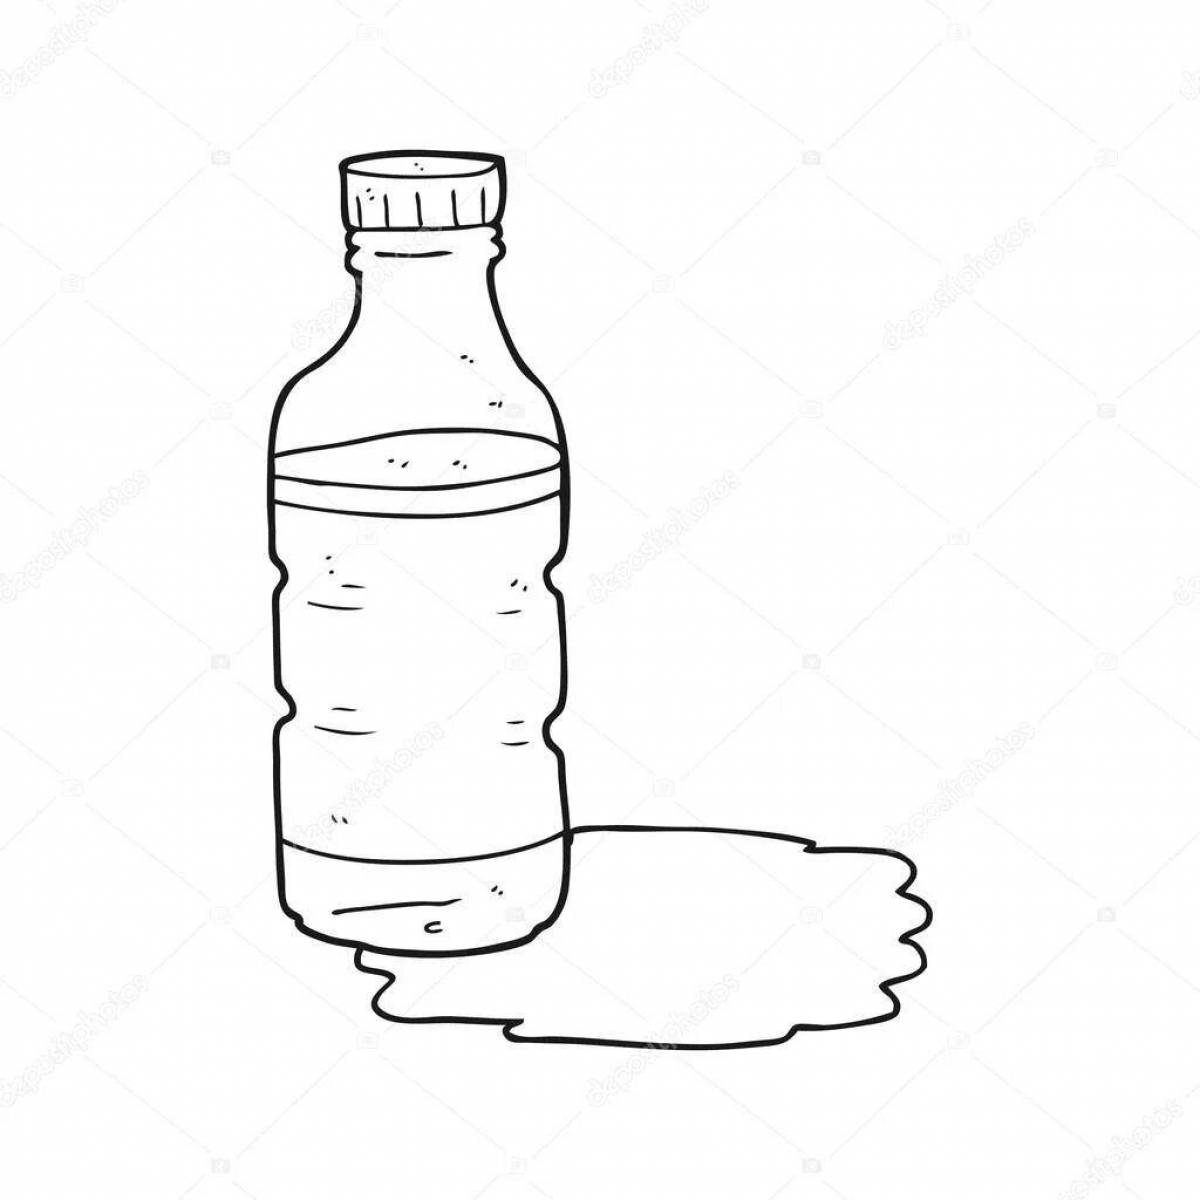 Playful bottle coloring page for kids